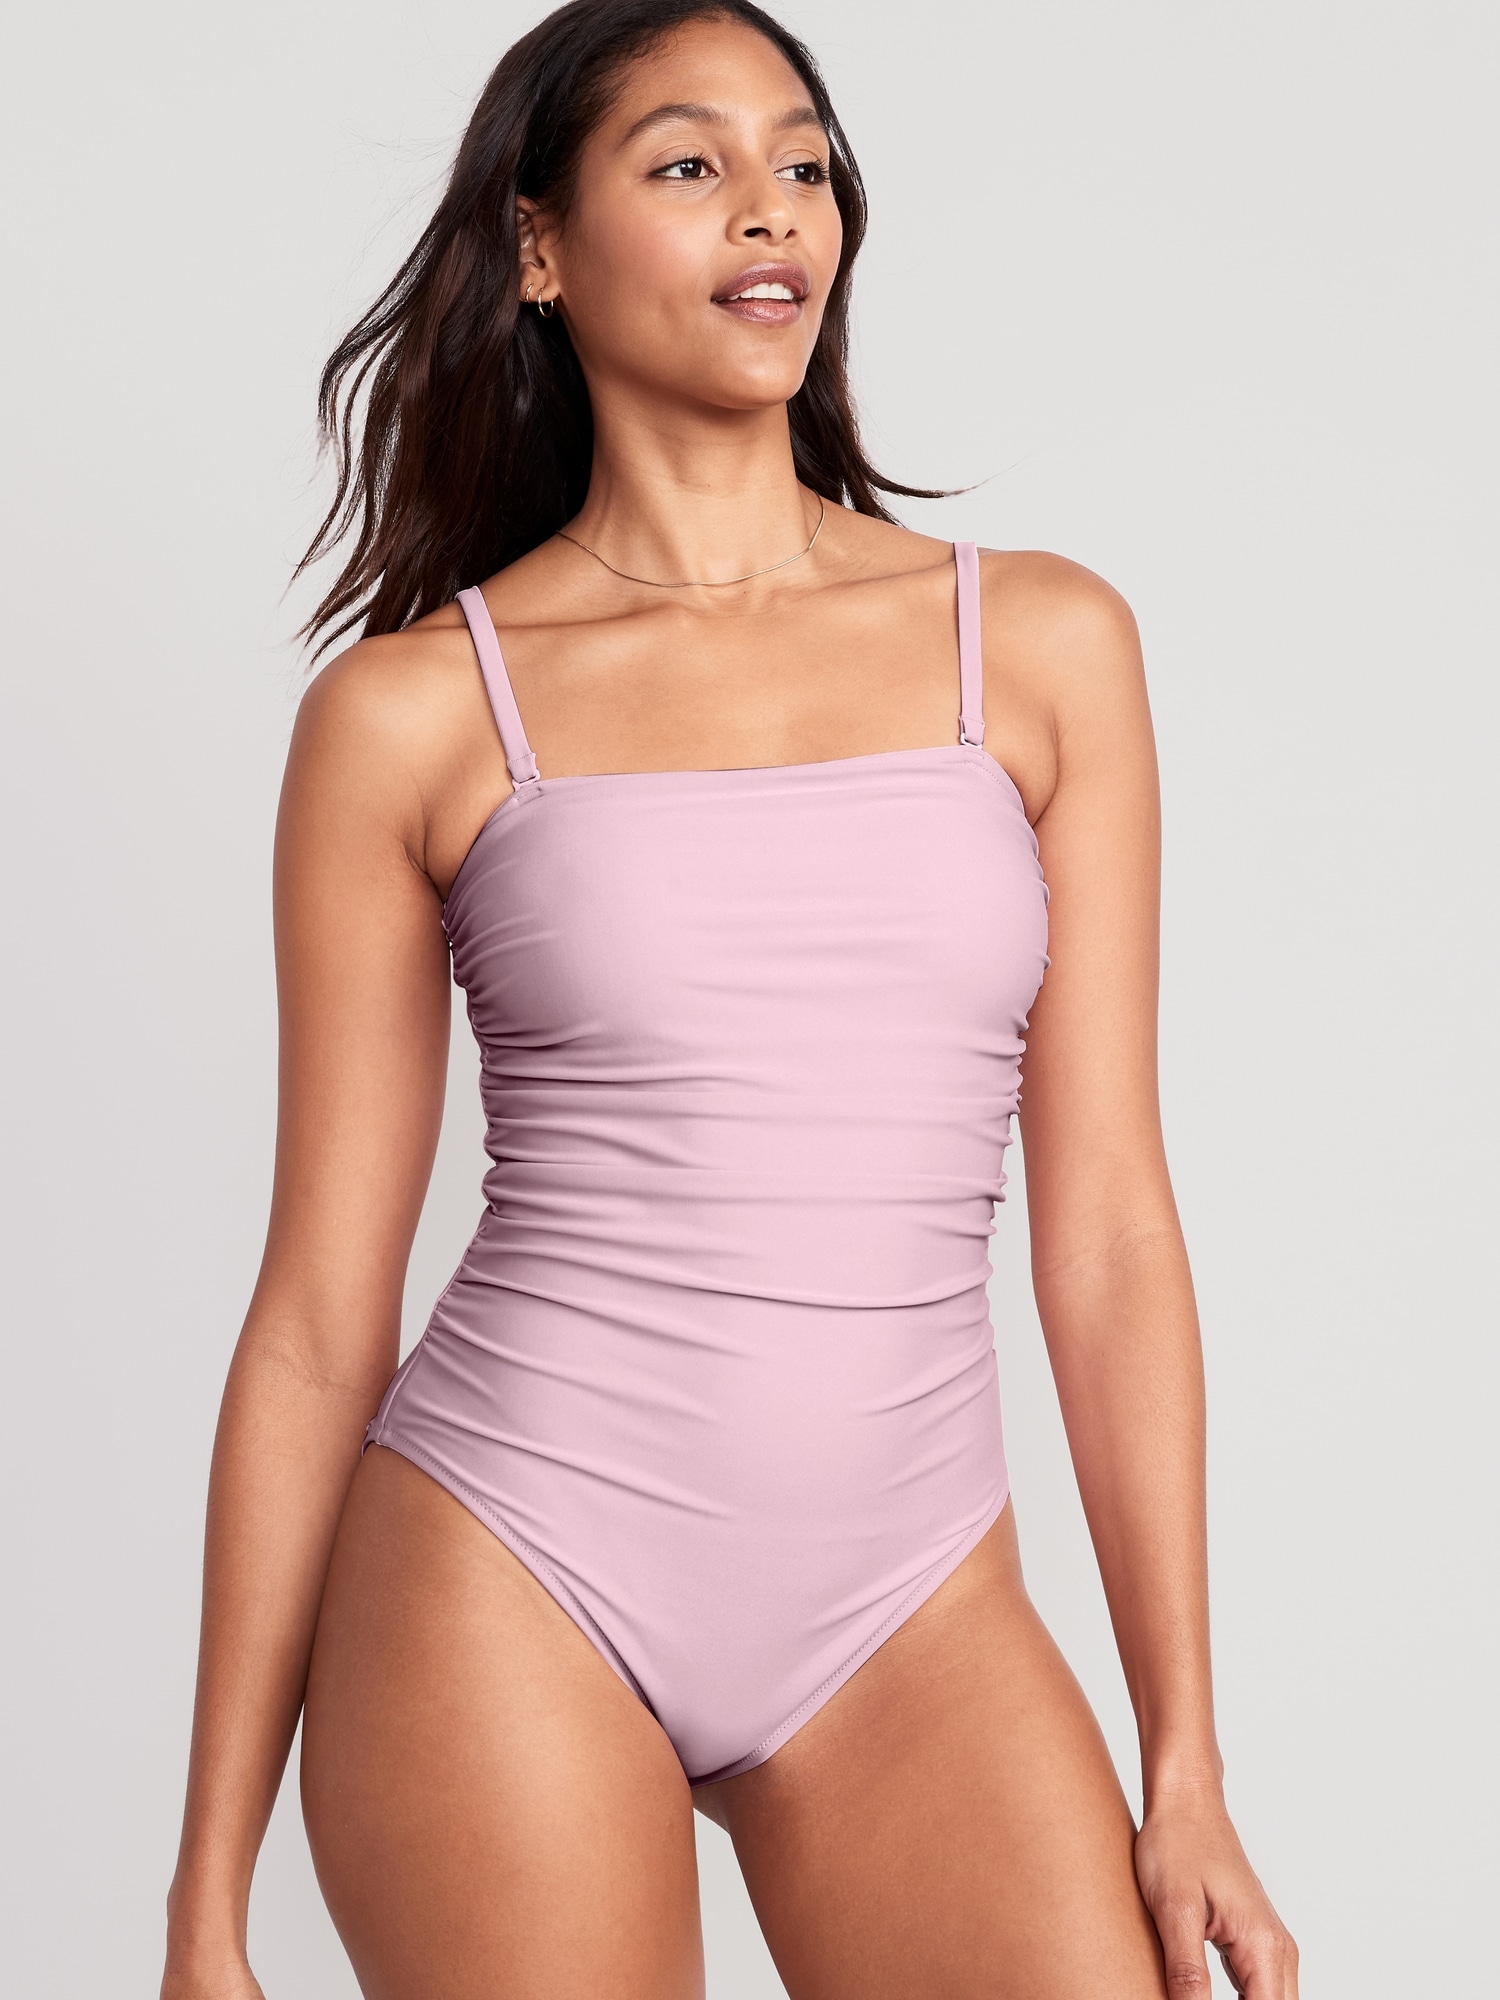 Old Navy Ruffled Convertible Bandeau Swim Top for Women